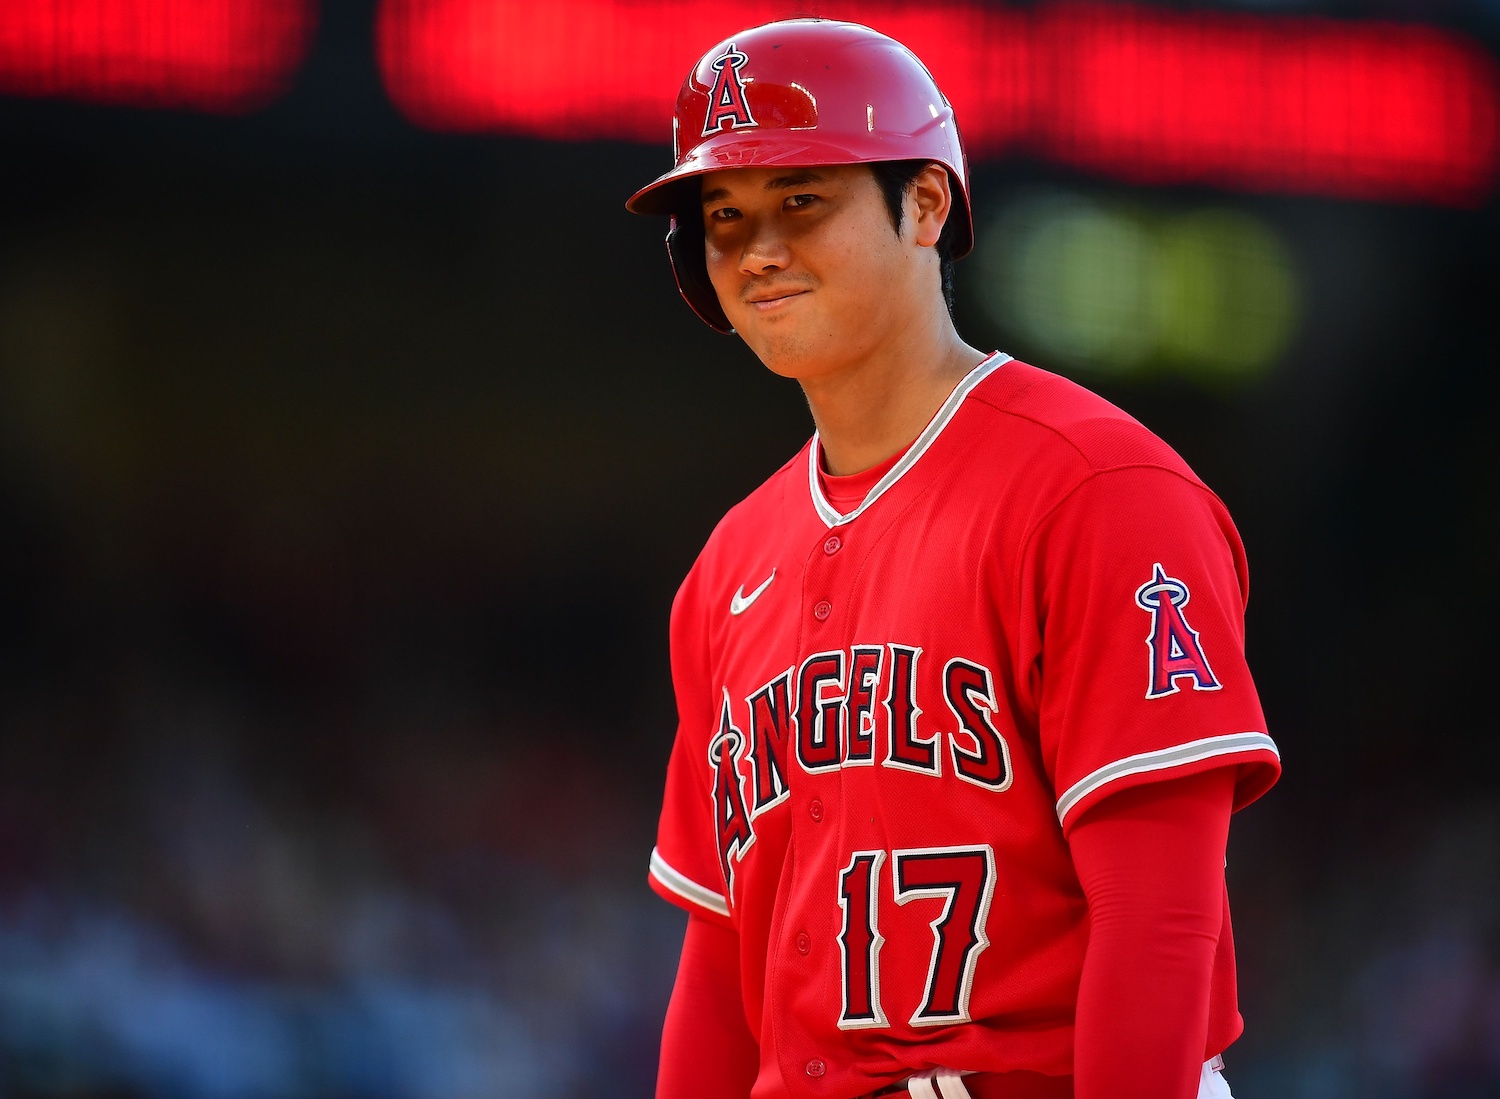 Angels: LA expects to have a new Shohei Ohtani in 2021